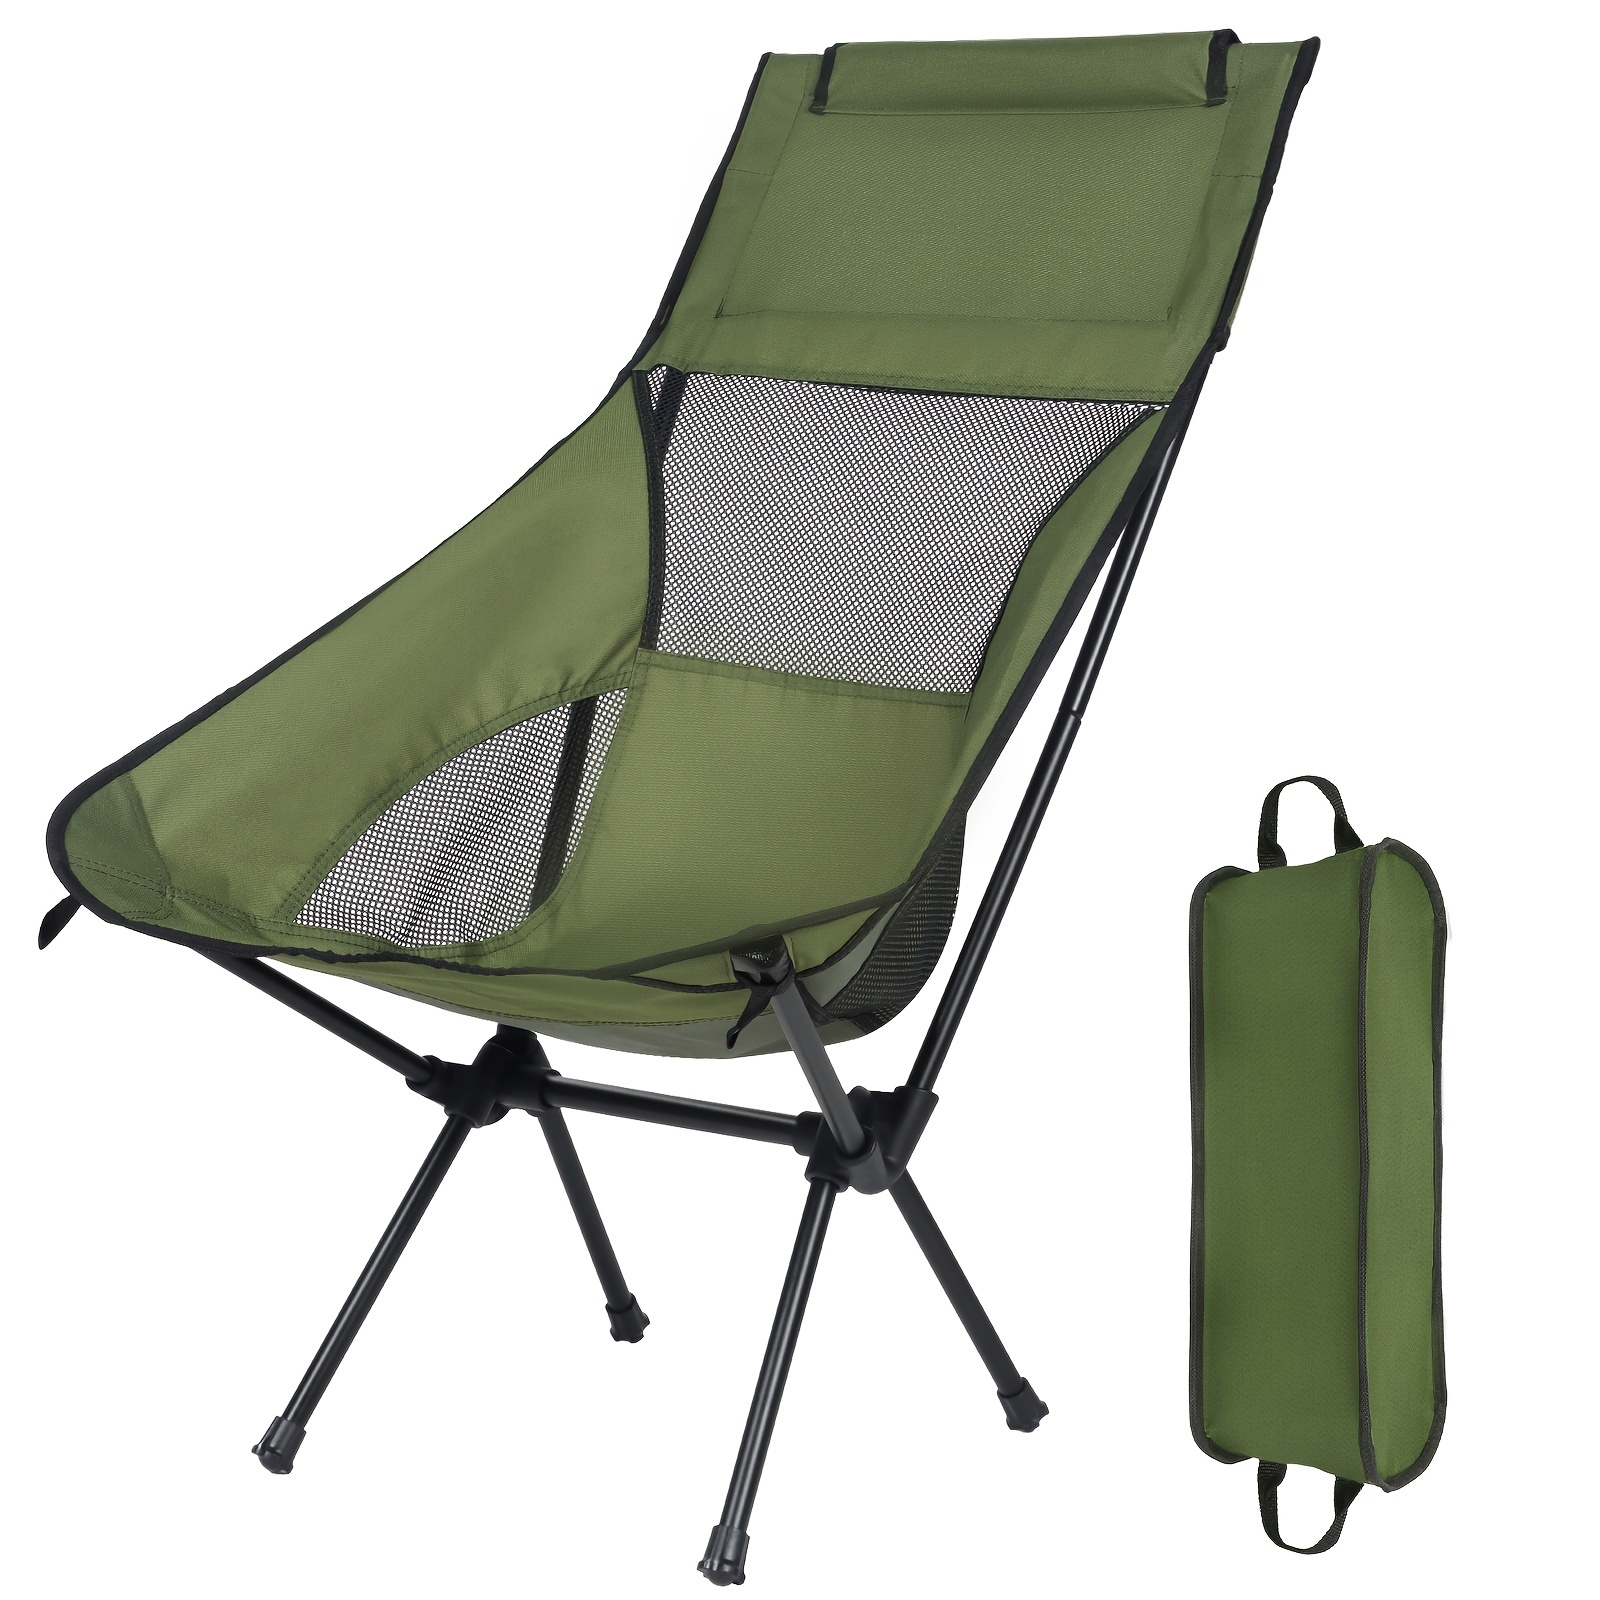  ADOCARN Camping Stool Foldable Chair Camping Foot Stool BBQ  Hiking Stools Fishing Chairs for Adults Heavy Duty Foldable Step Stool for  Adults Small Camping Chair Car Barbecue Metal : Sports 